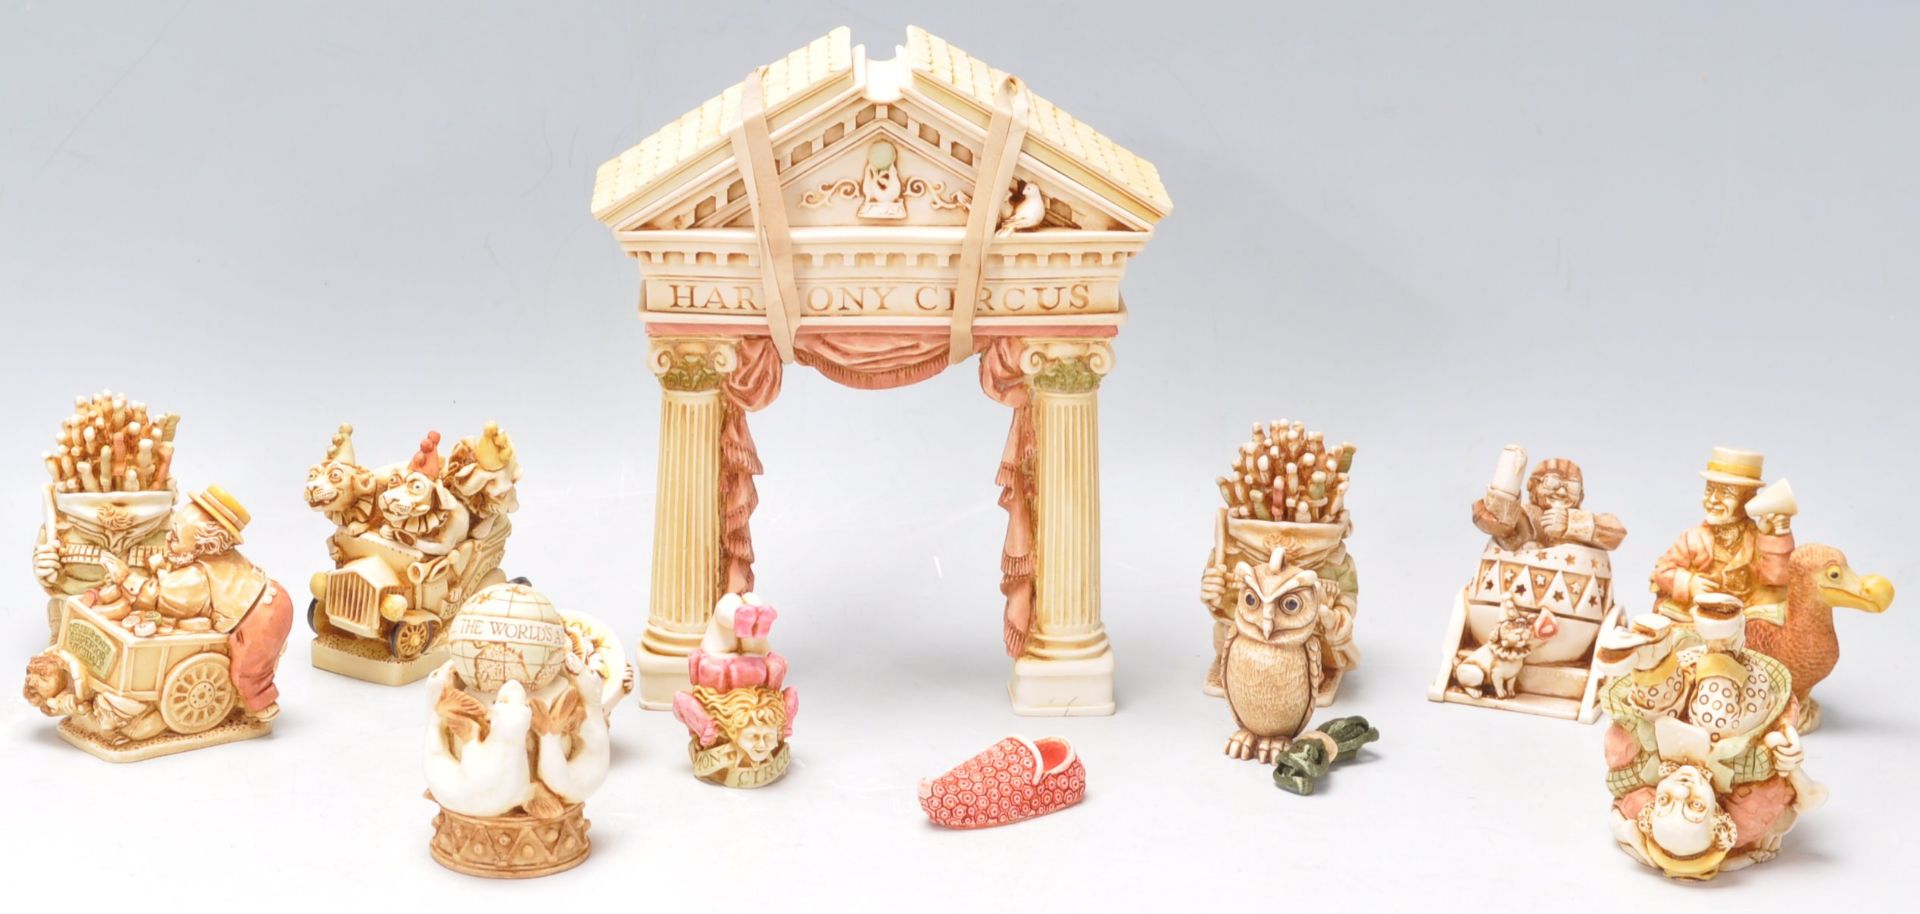 A collection of Harmony Kingdom resin circus theme figurines and ornaments to include a clown,